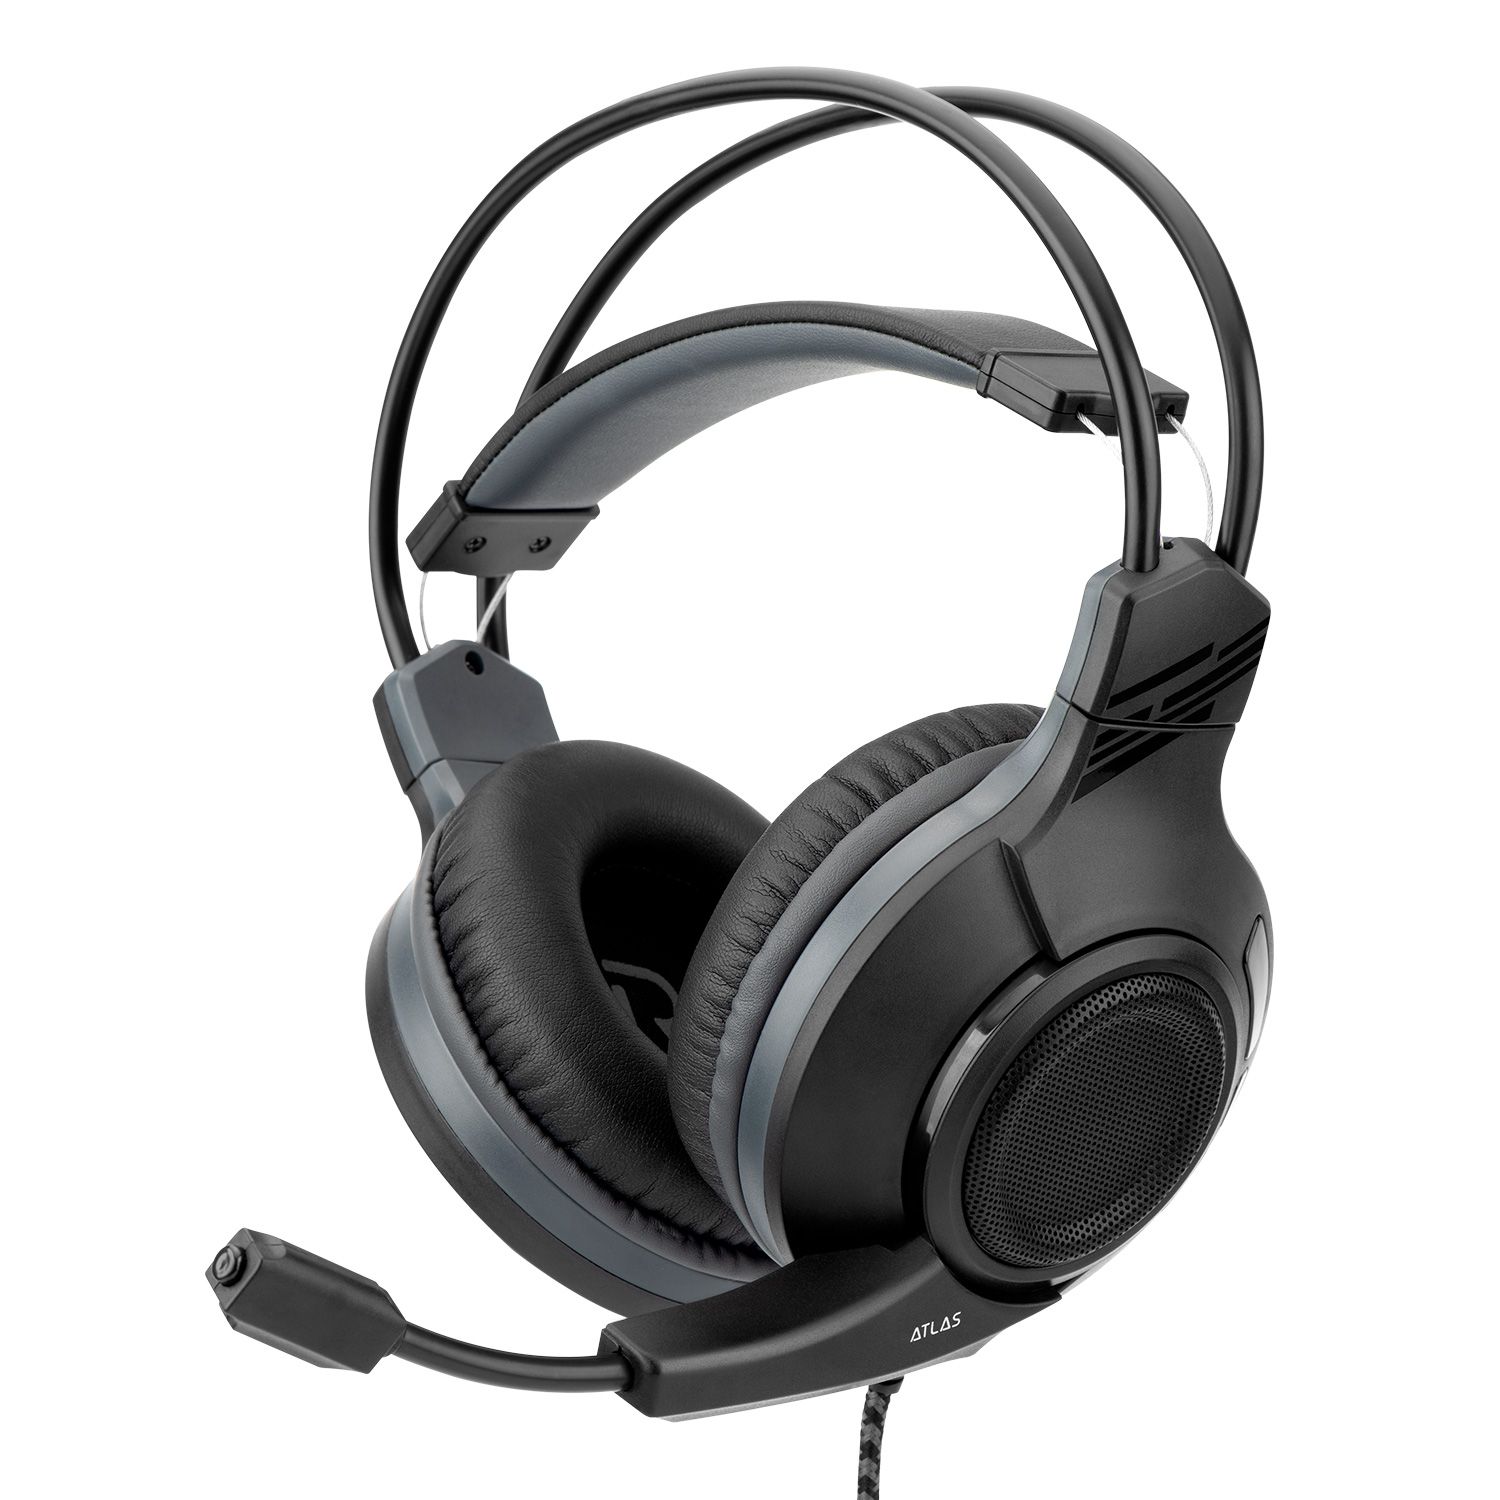 Atlas Gaming Headset 7 1 Surround Sound For Pc Consoles